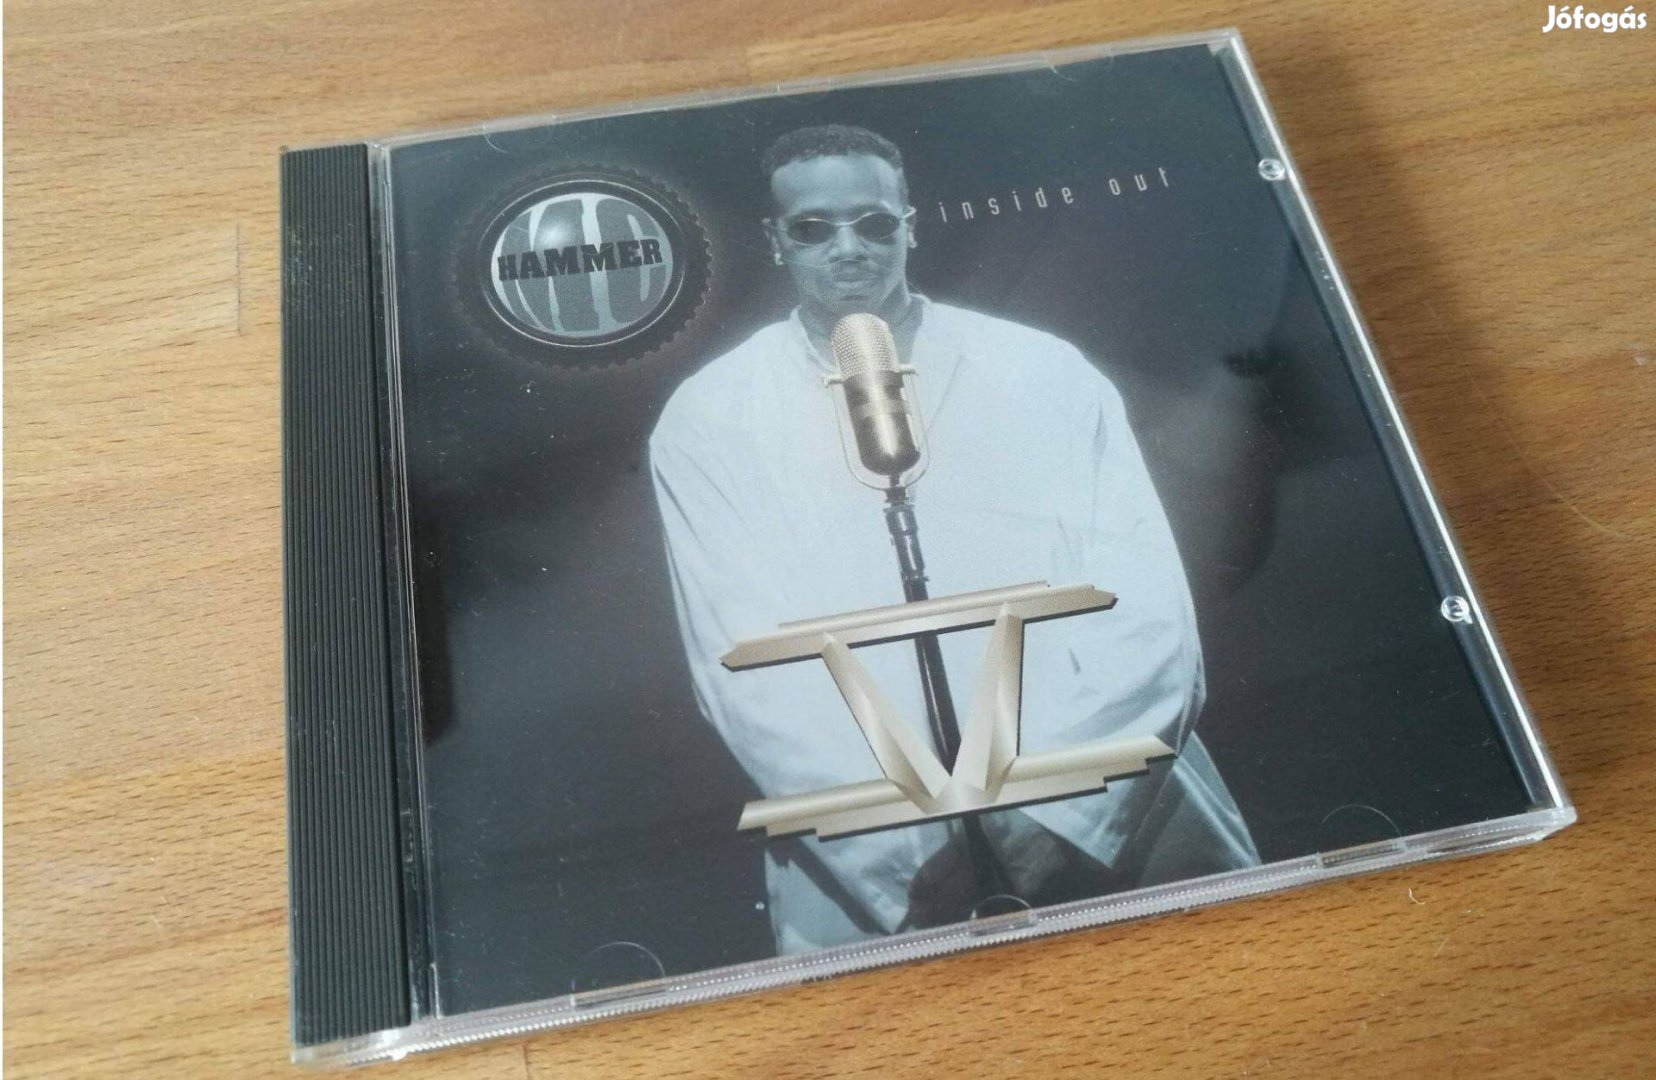 MC Hammer - Inside out (Giant Records, UK, 1995, CD)